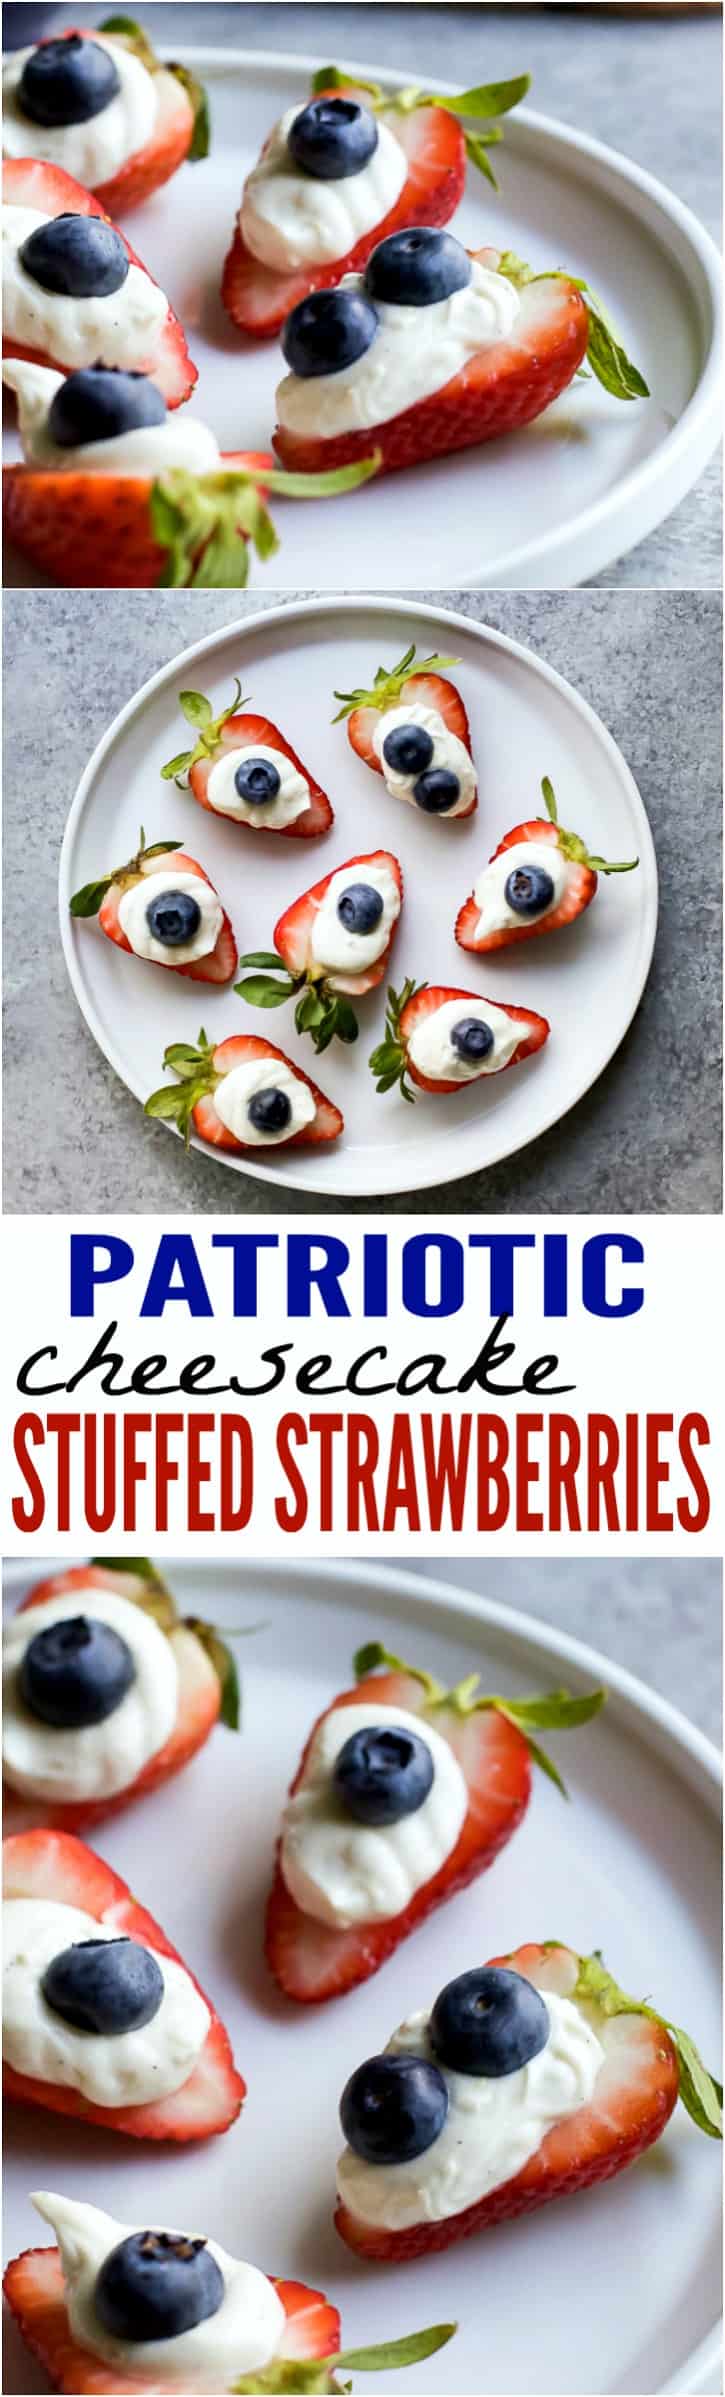 Patriotic Cheesecake Stuffed Strawberries - an easy healthy recipe that tastes like strawberry cheesecake but without all the calories!